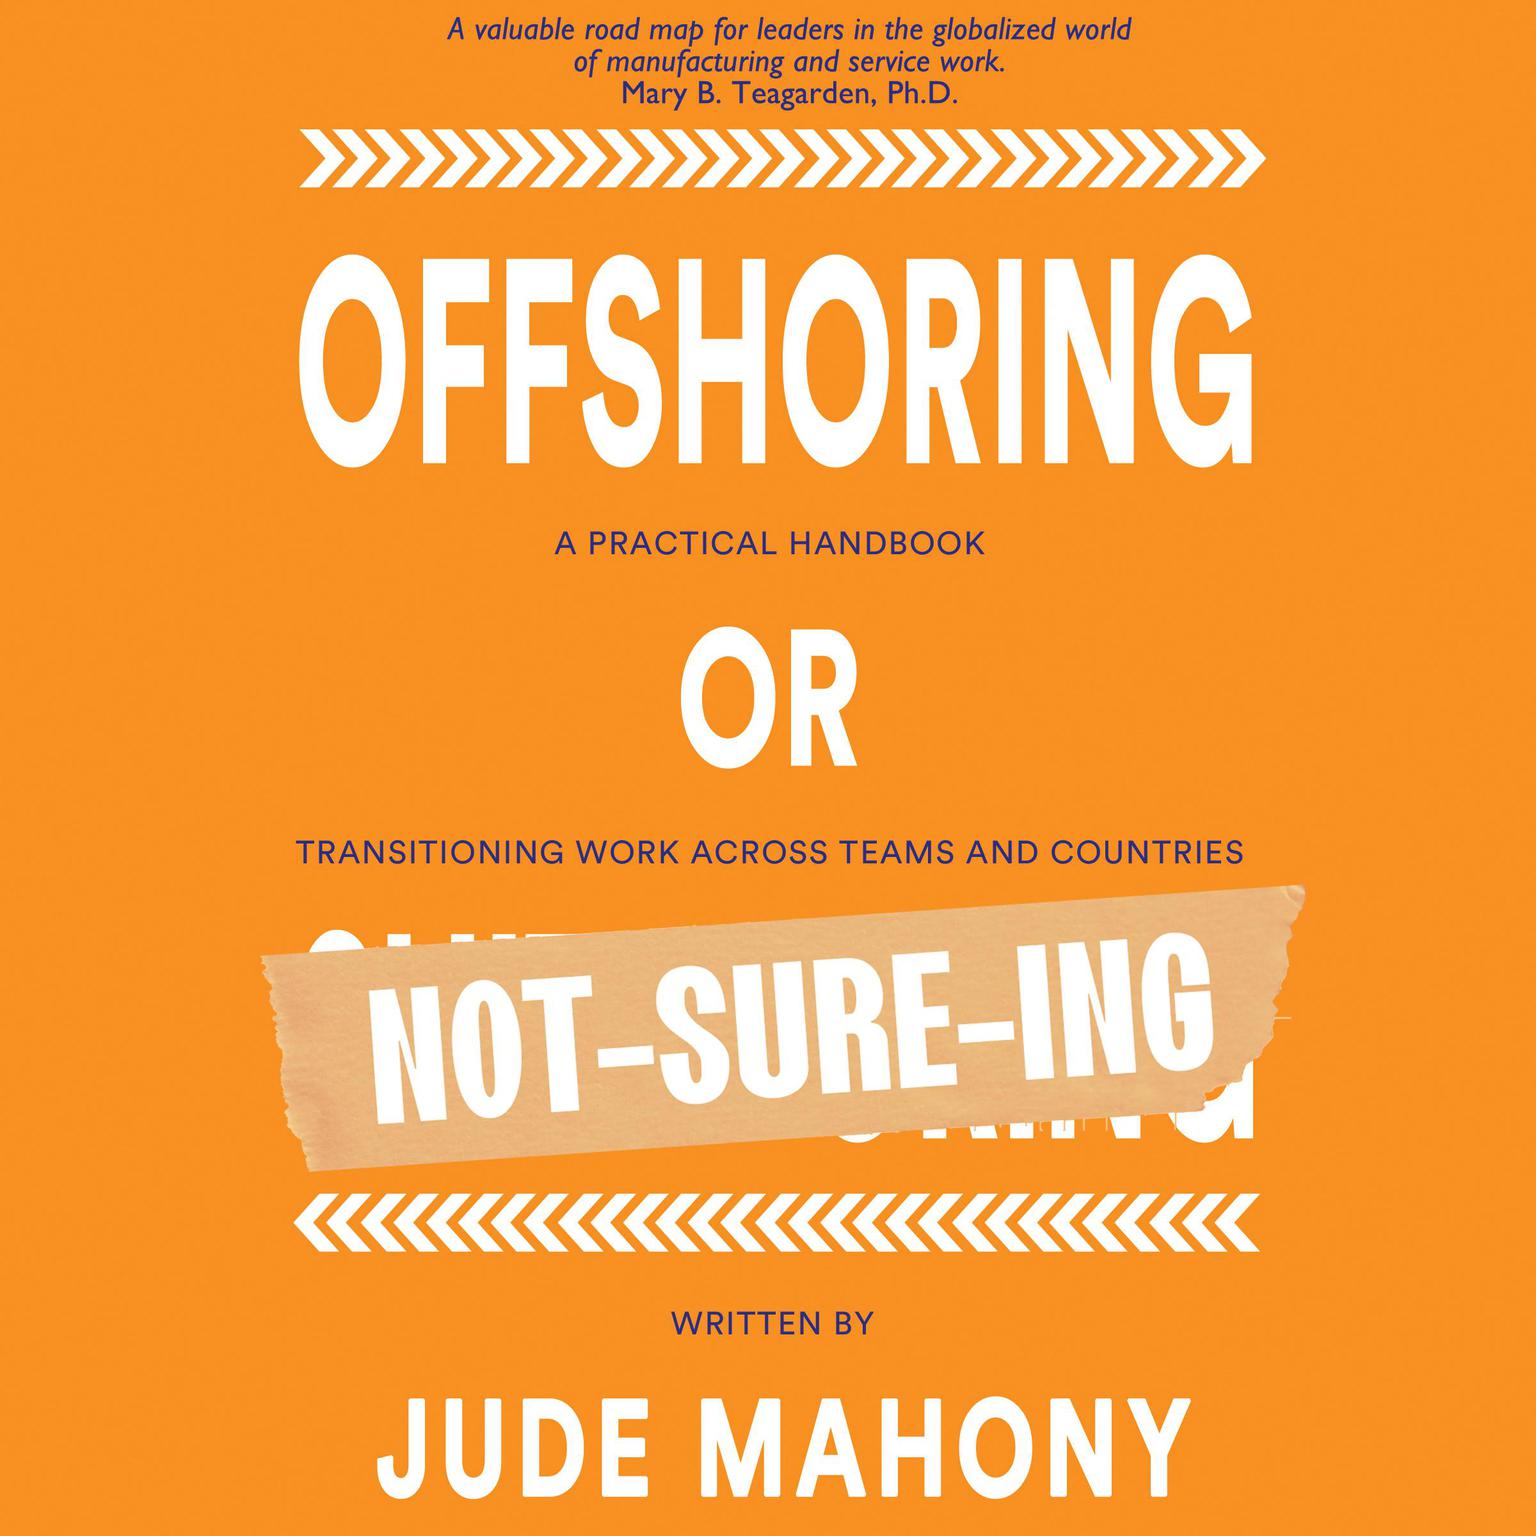 Offshoring or Not-Sure-ing Audiobook, by Jude Mahony